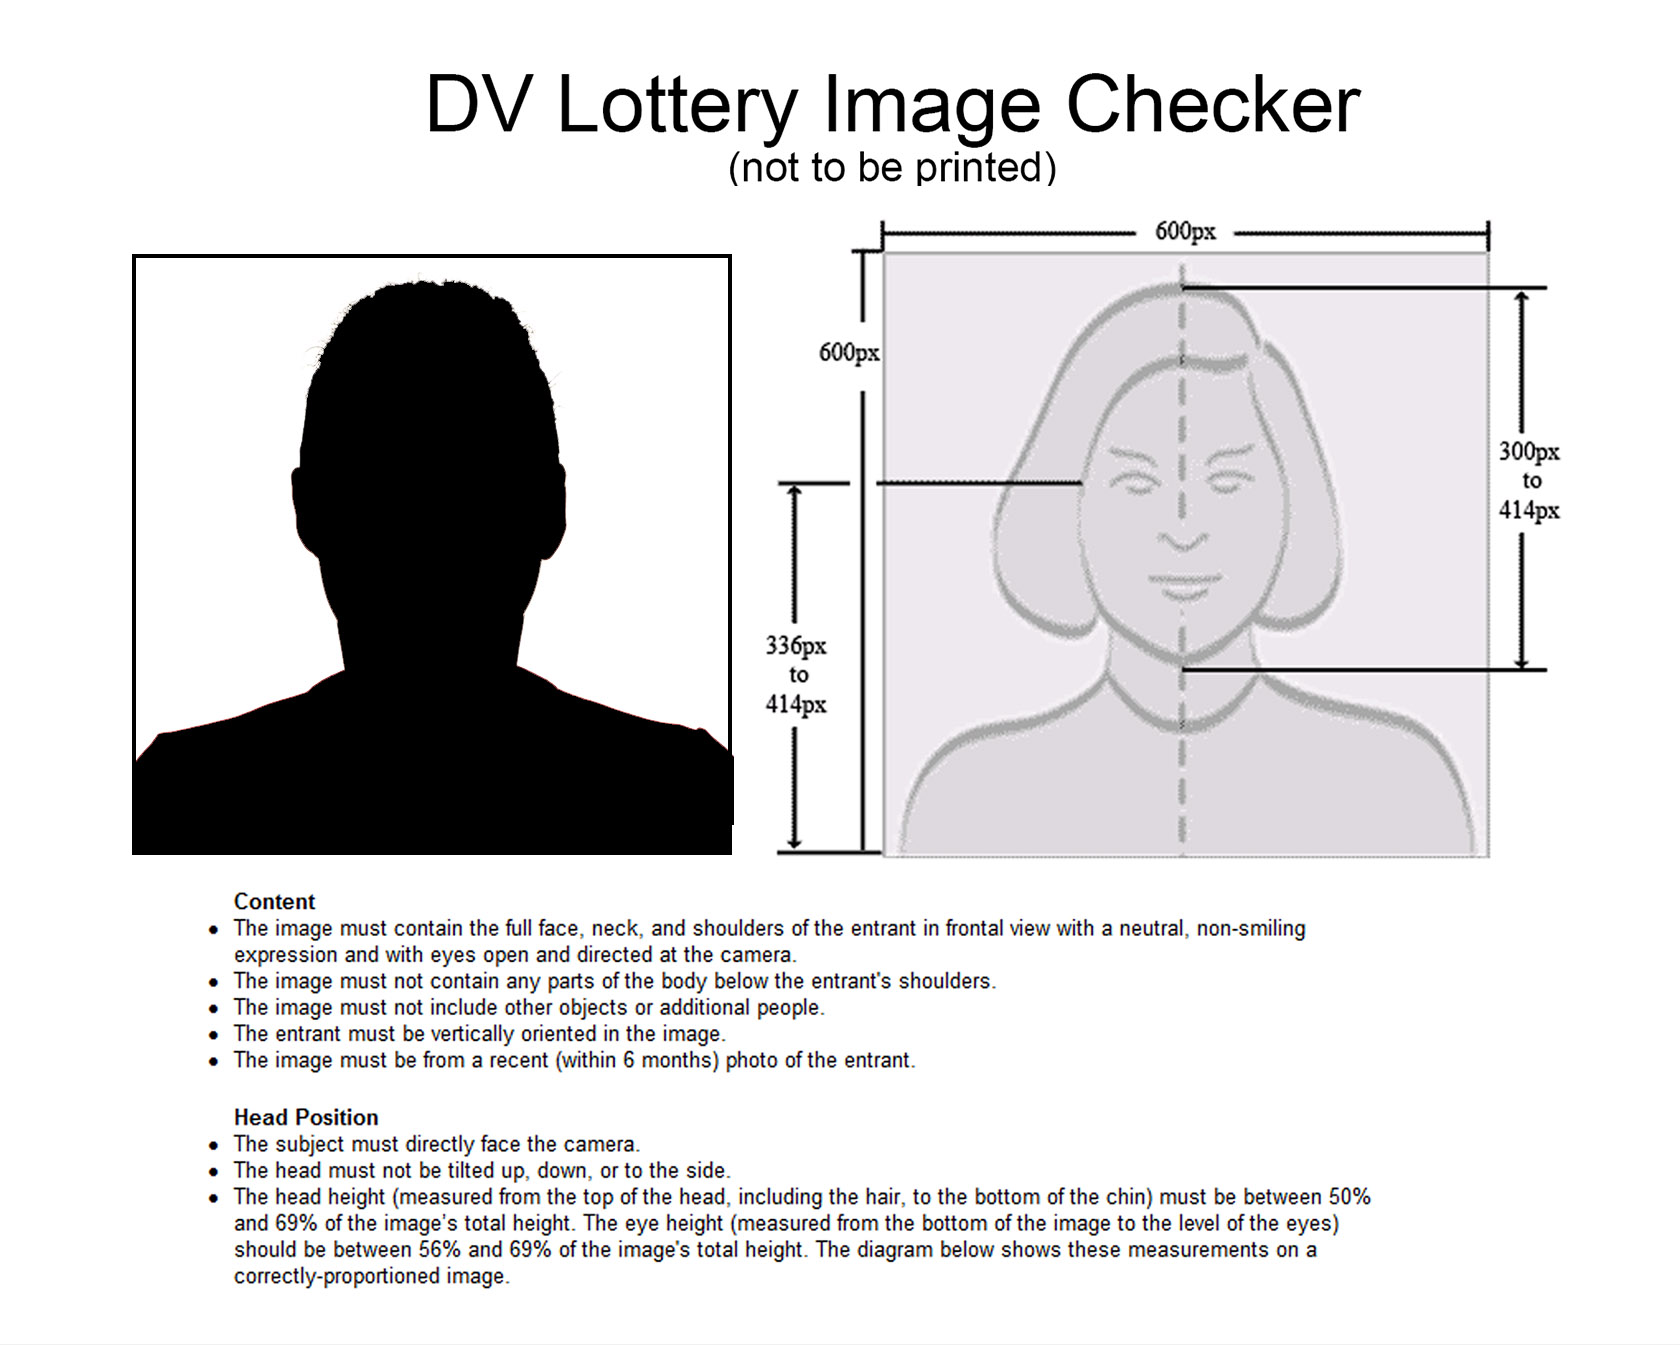 free online photo editor for dv lottery